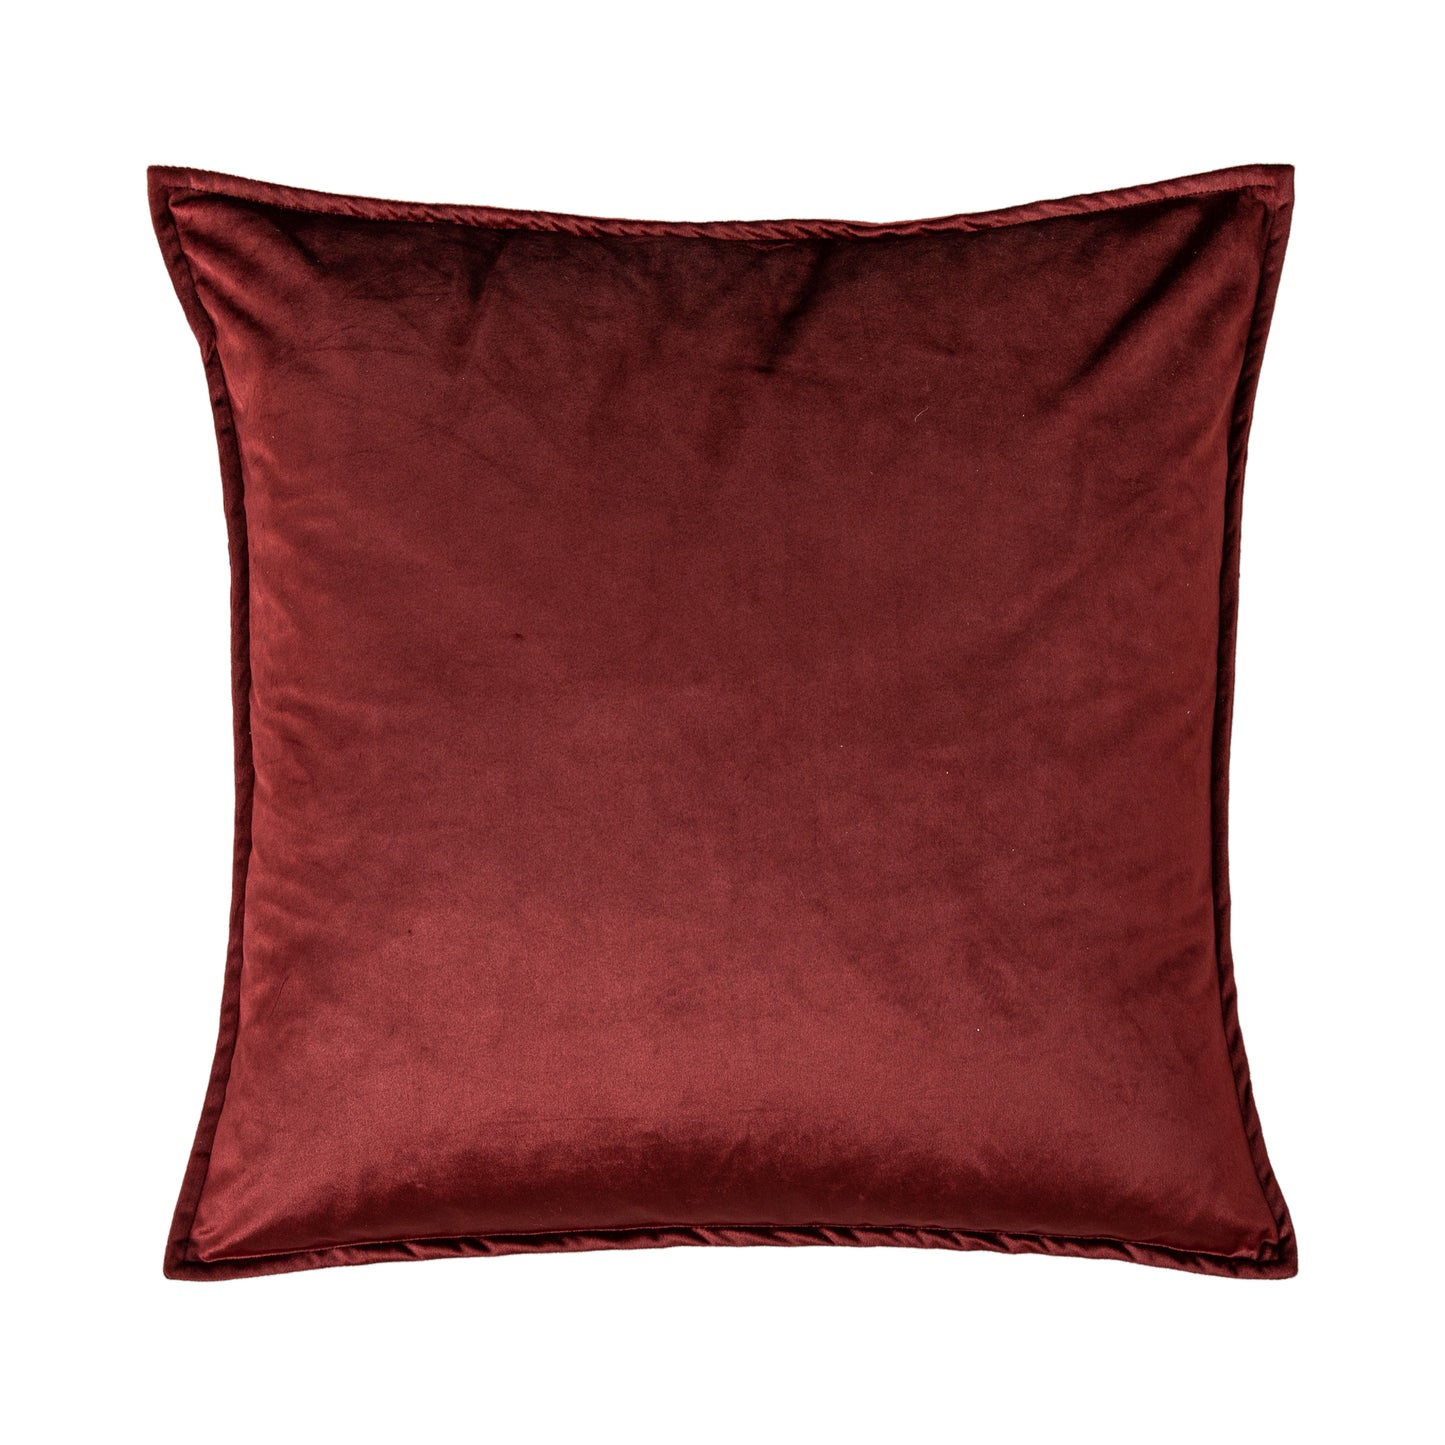 A Meto Velvet Oxford Cushion in Merlot, adding elegance and comfort to your interior decor.